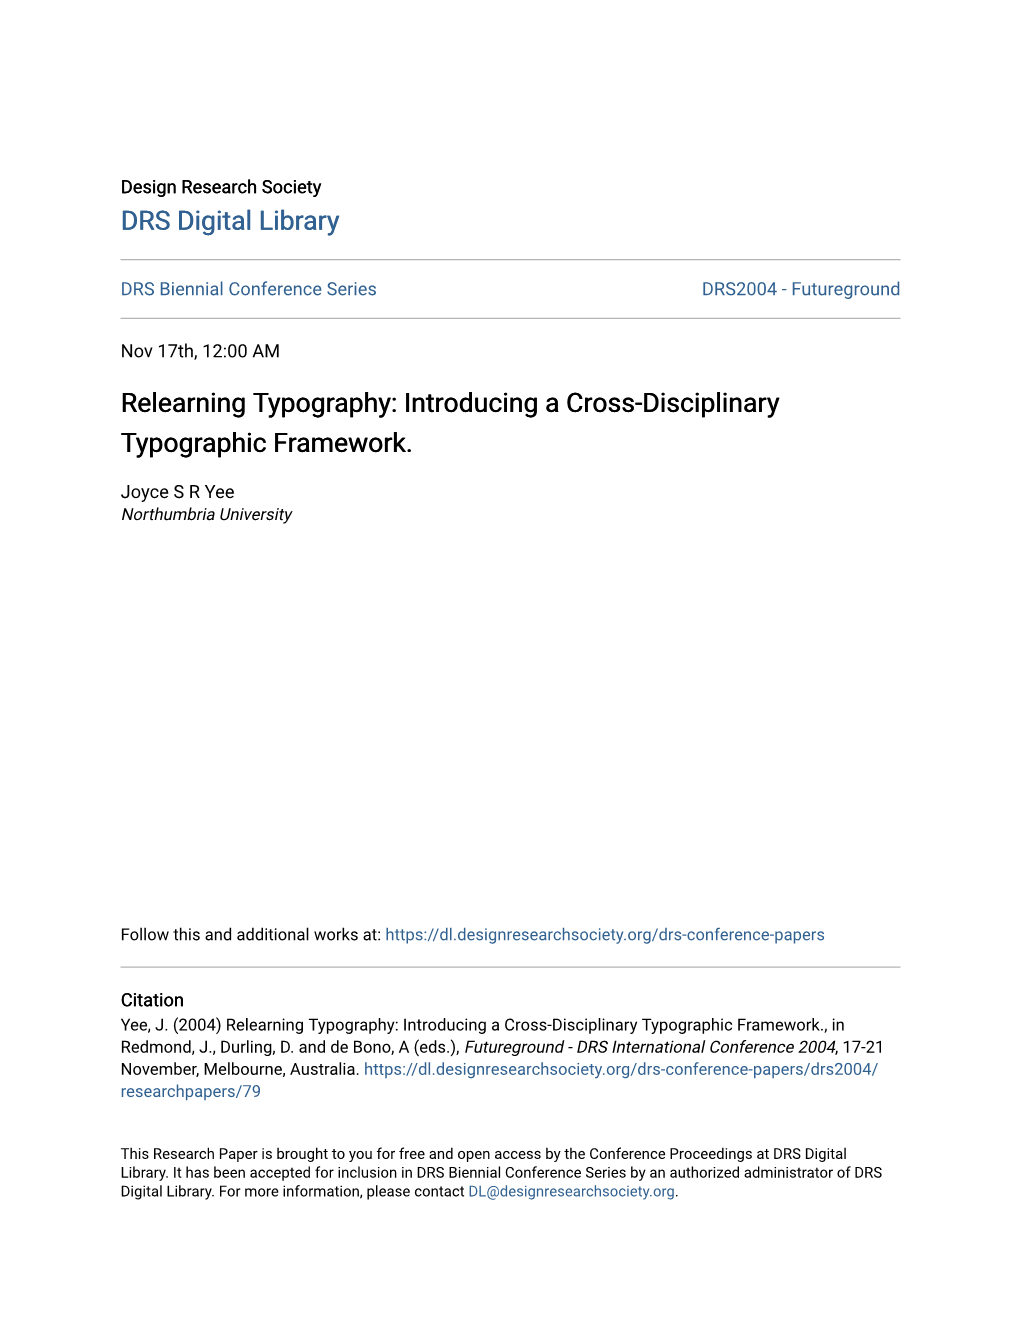 Relearning Typography: Introducing a Cross-Disciplinary Typographic Framework